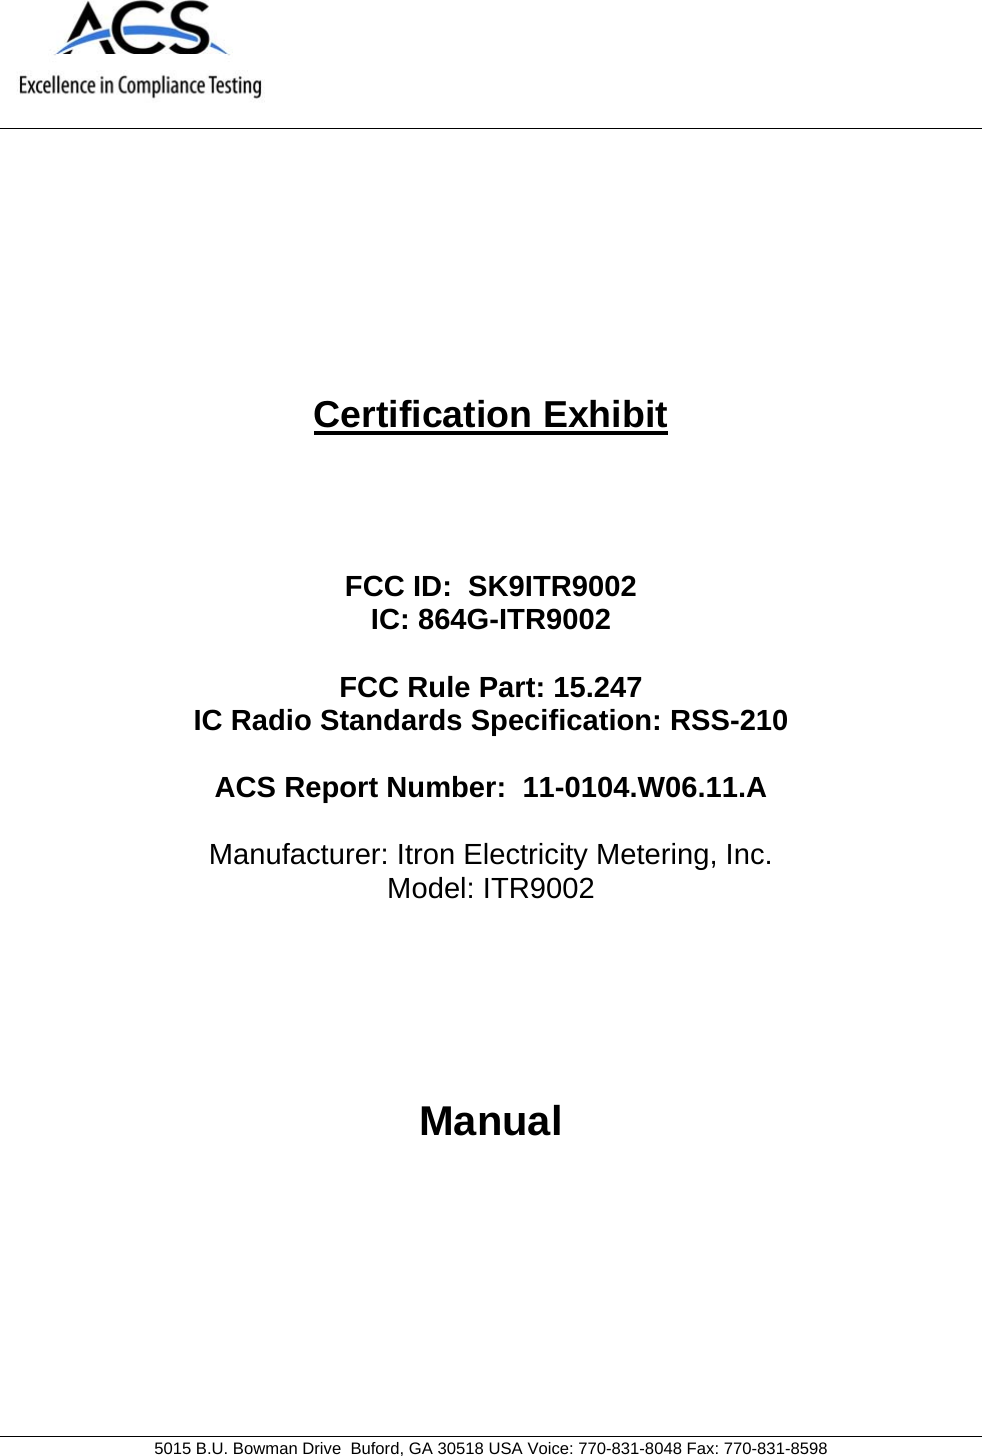     5015 B.U. Bowman Drive  Buford, GA 30518 USA Voice: 770-831-8048 Fax: 770-831-8598   Certification Exhibit     FCC ID:  SK9ITR9002 IC: 864G-ITR9002  FCC Rule Part: 15.247 IC Radio Standards Specification: RSS-210  ACS Report Number:  11-0104.W06.11.A   Manufacturer: Itron Electricity Metering, Inc. Model: ITR9002     Manual  